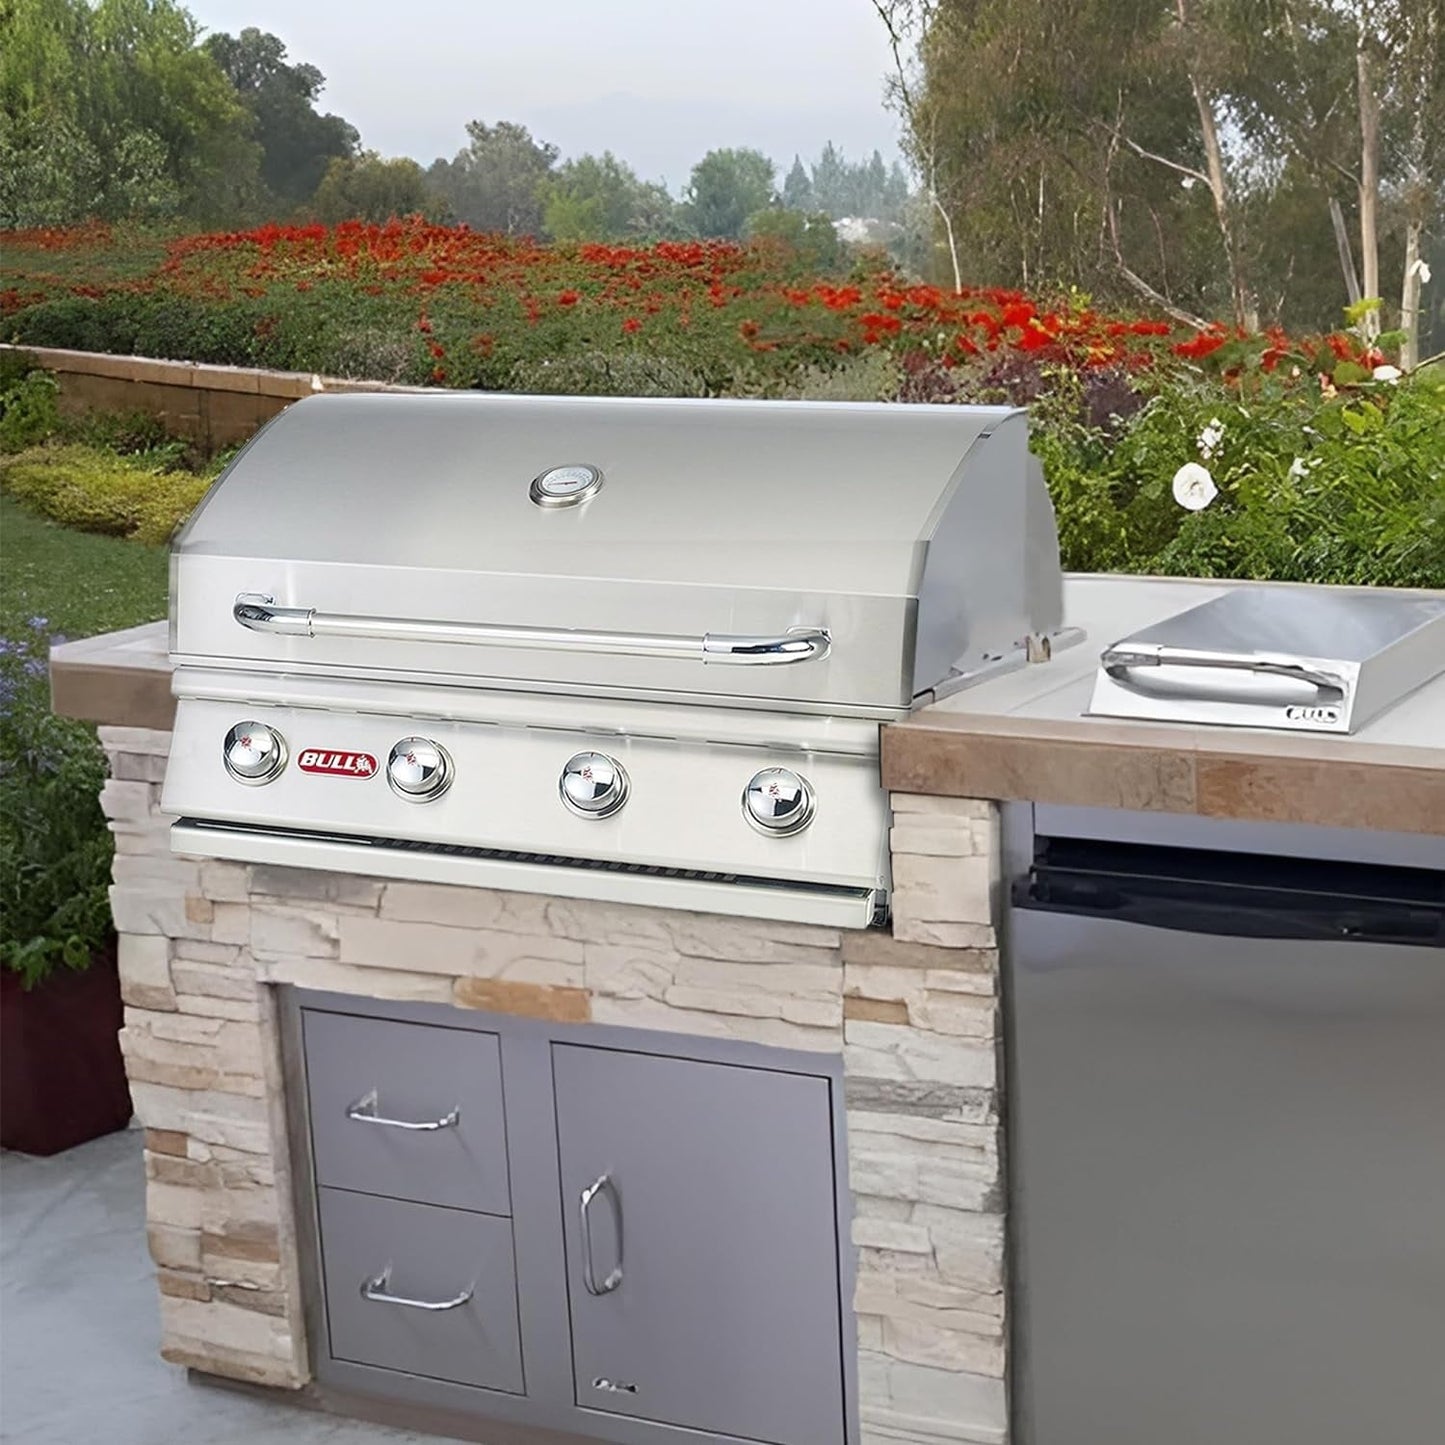 Bull 30" Lonestar Select Stainless Steel Drop-In Grill